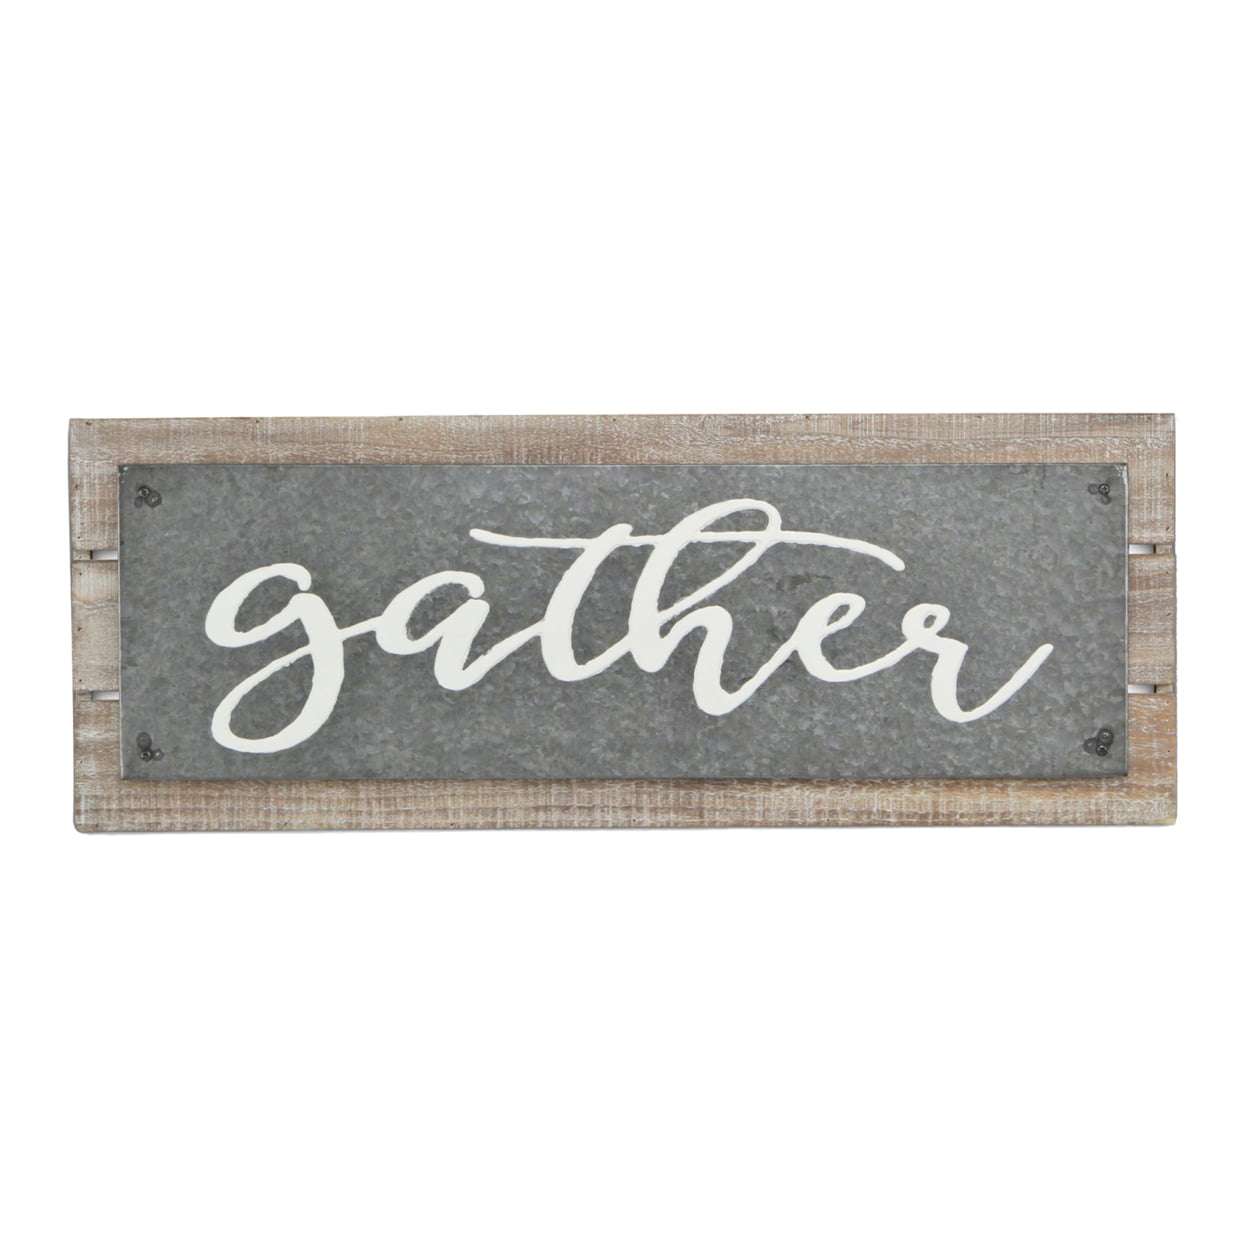 Picture of Cheungs 5425 Metal Wall Art on Wood Plank with Epoxy Printed Text - Gather